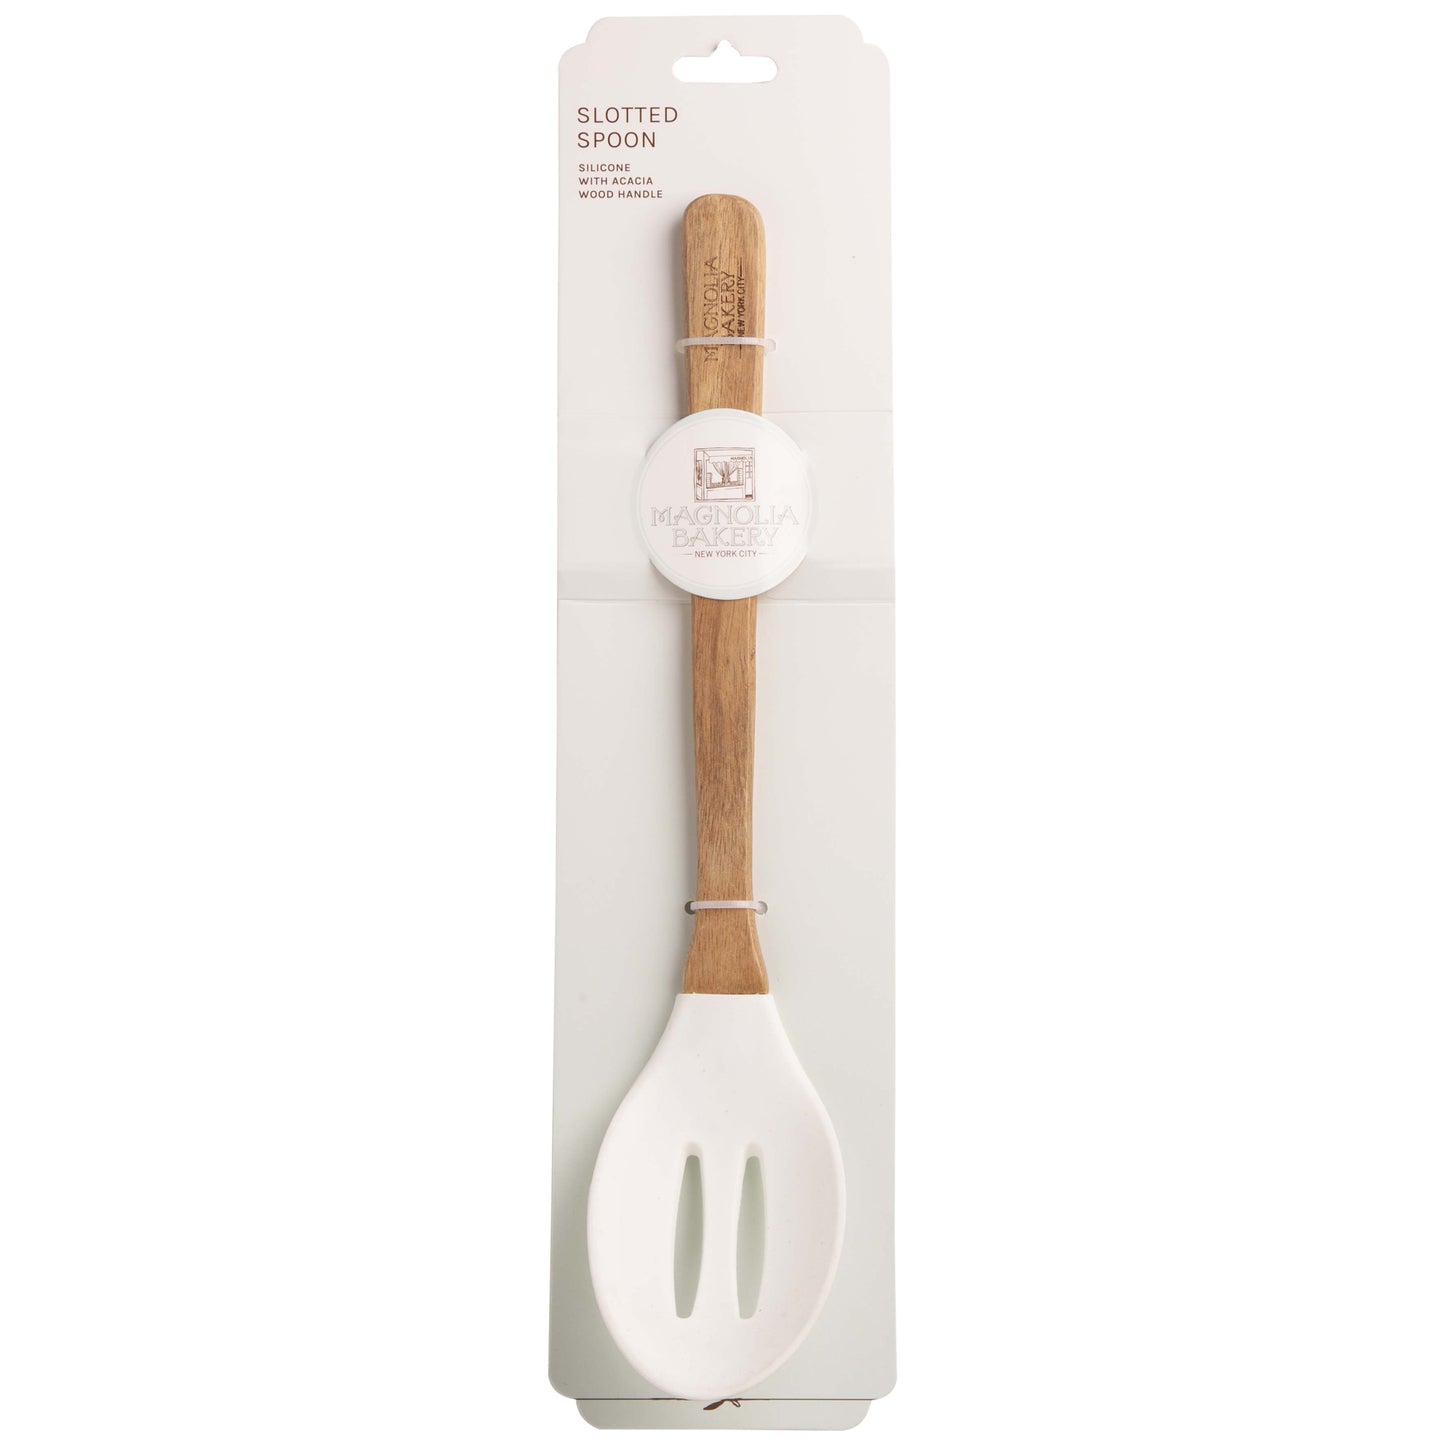 White Silicone Slotted Spoon